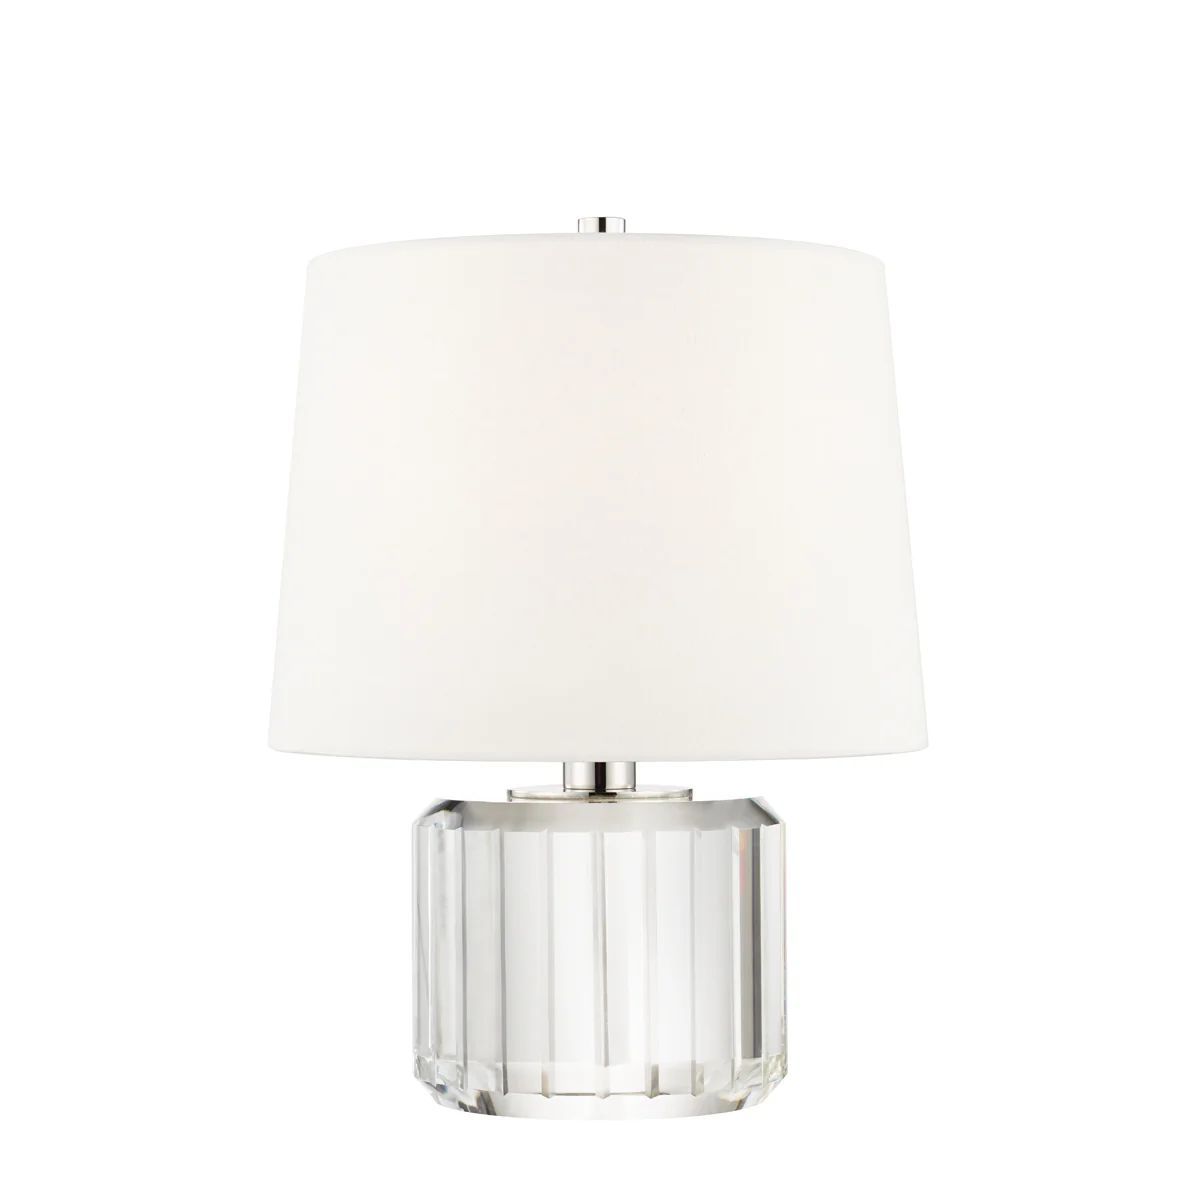 Hague Table Lamp | Tuesday Made